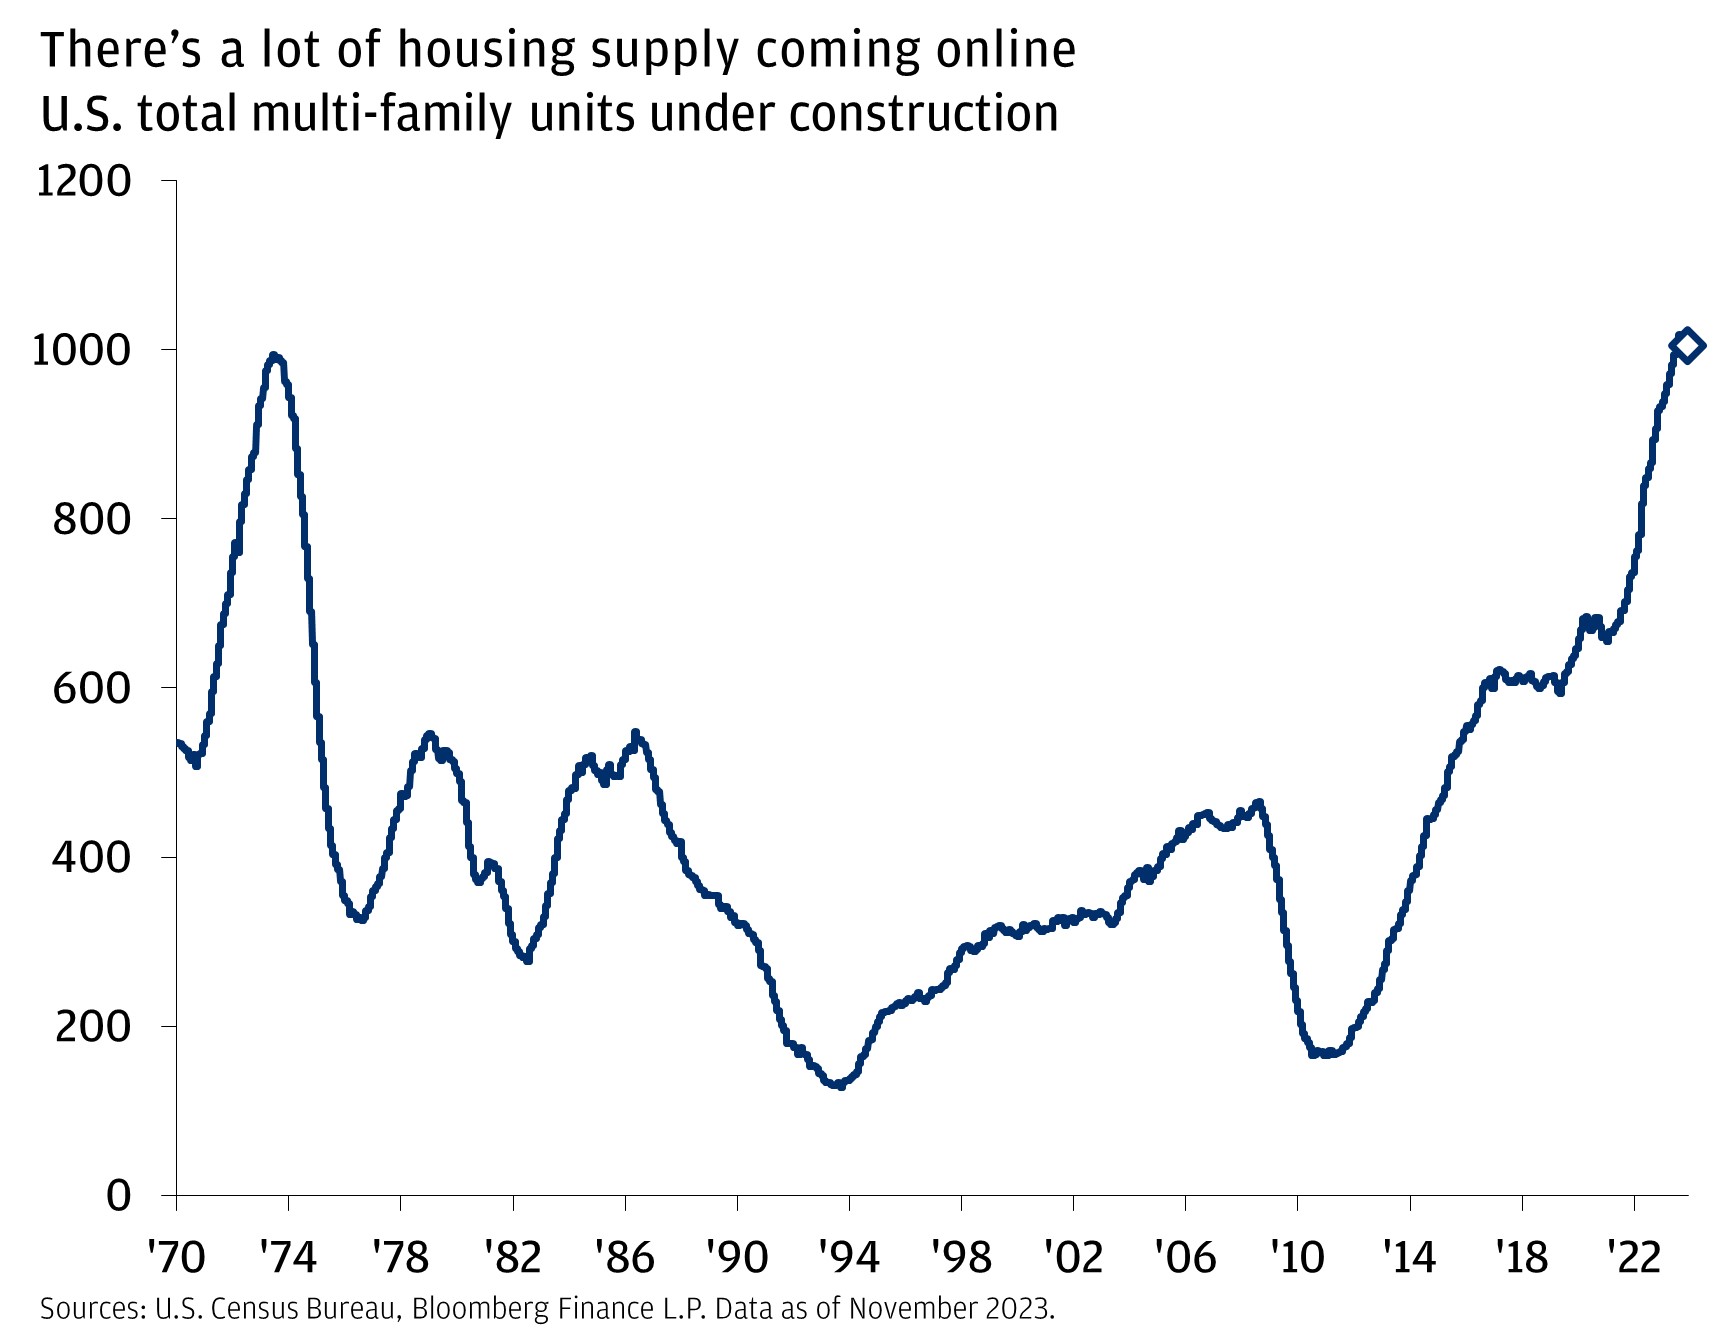 This chart shows U.S. total multi-family units under construction, from 1969 to November 2023. 